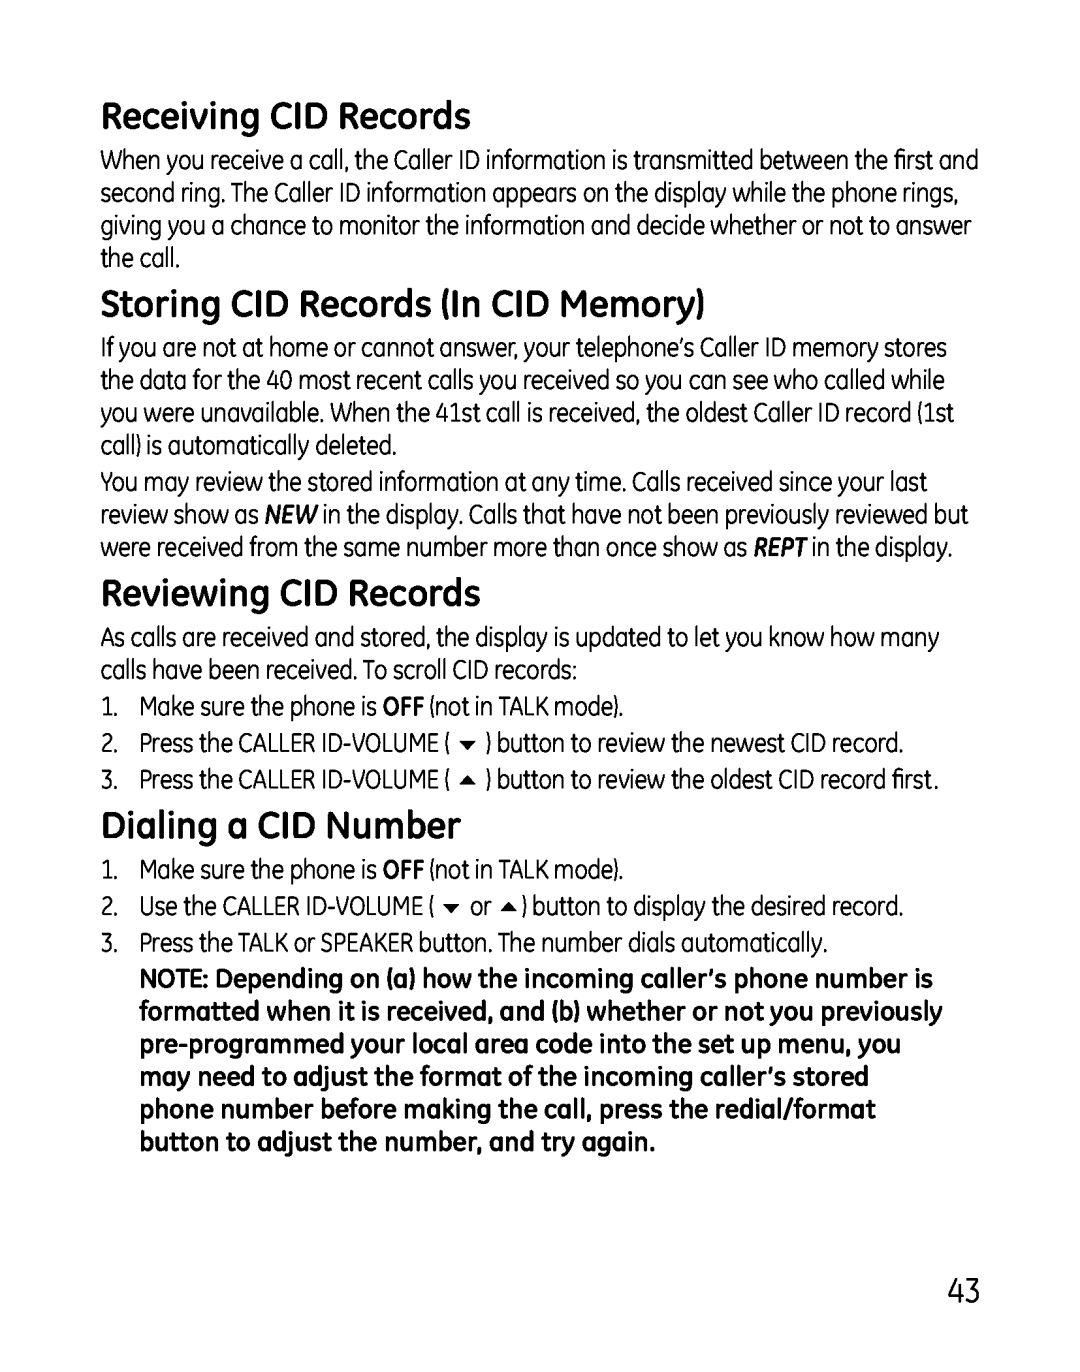 GE 28801, 881, 0007 Receiving CID Records, Storing CID Records In CID Memory, Reviewing CID Records, Dialing a CID Number 